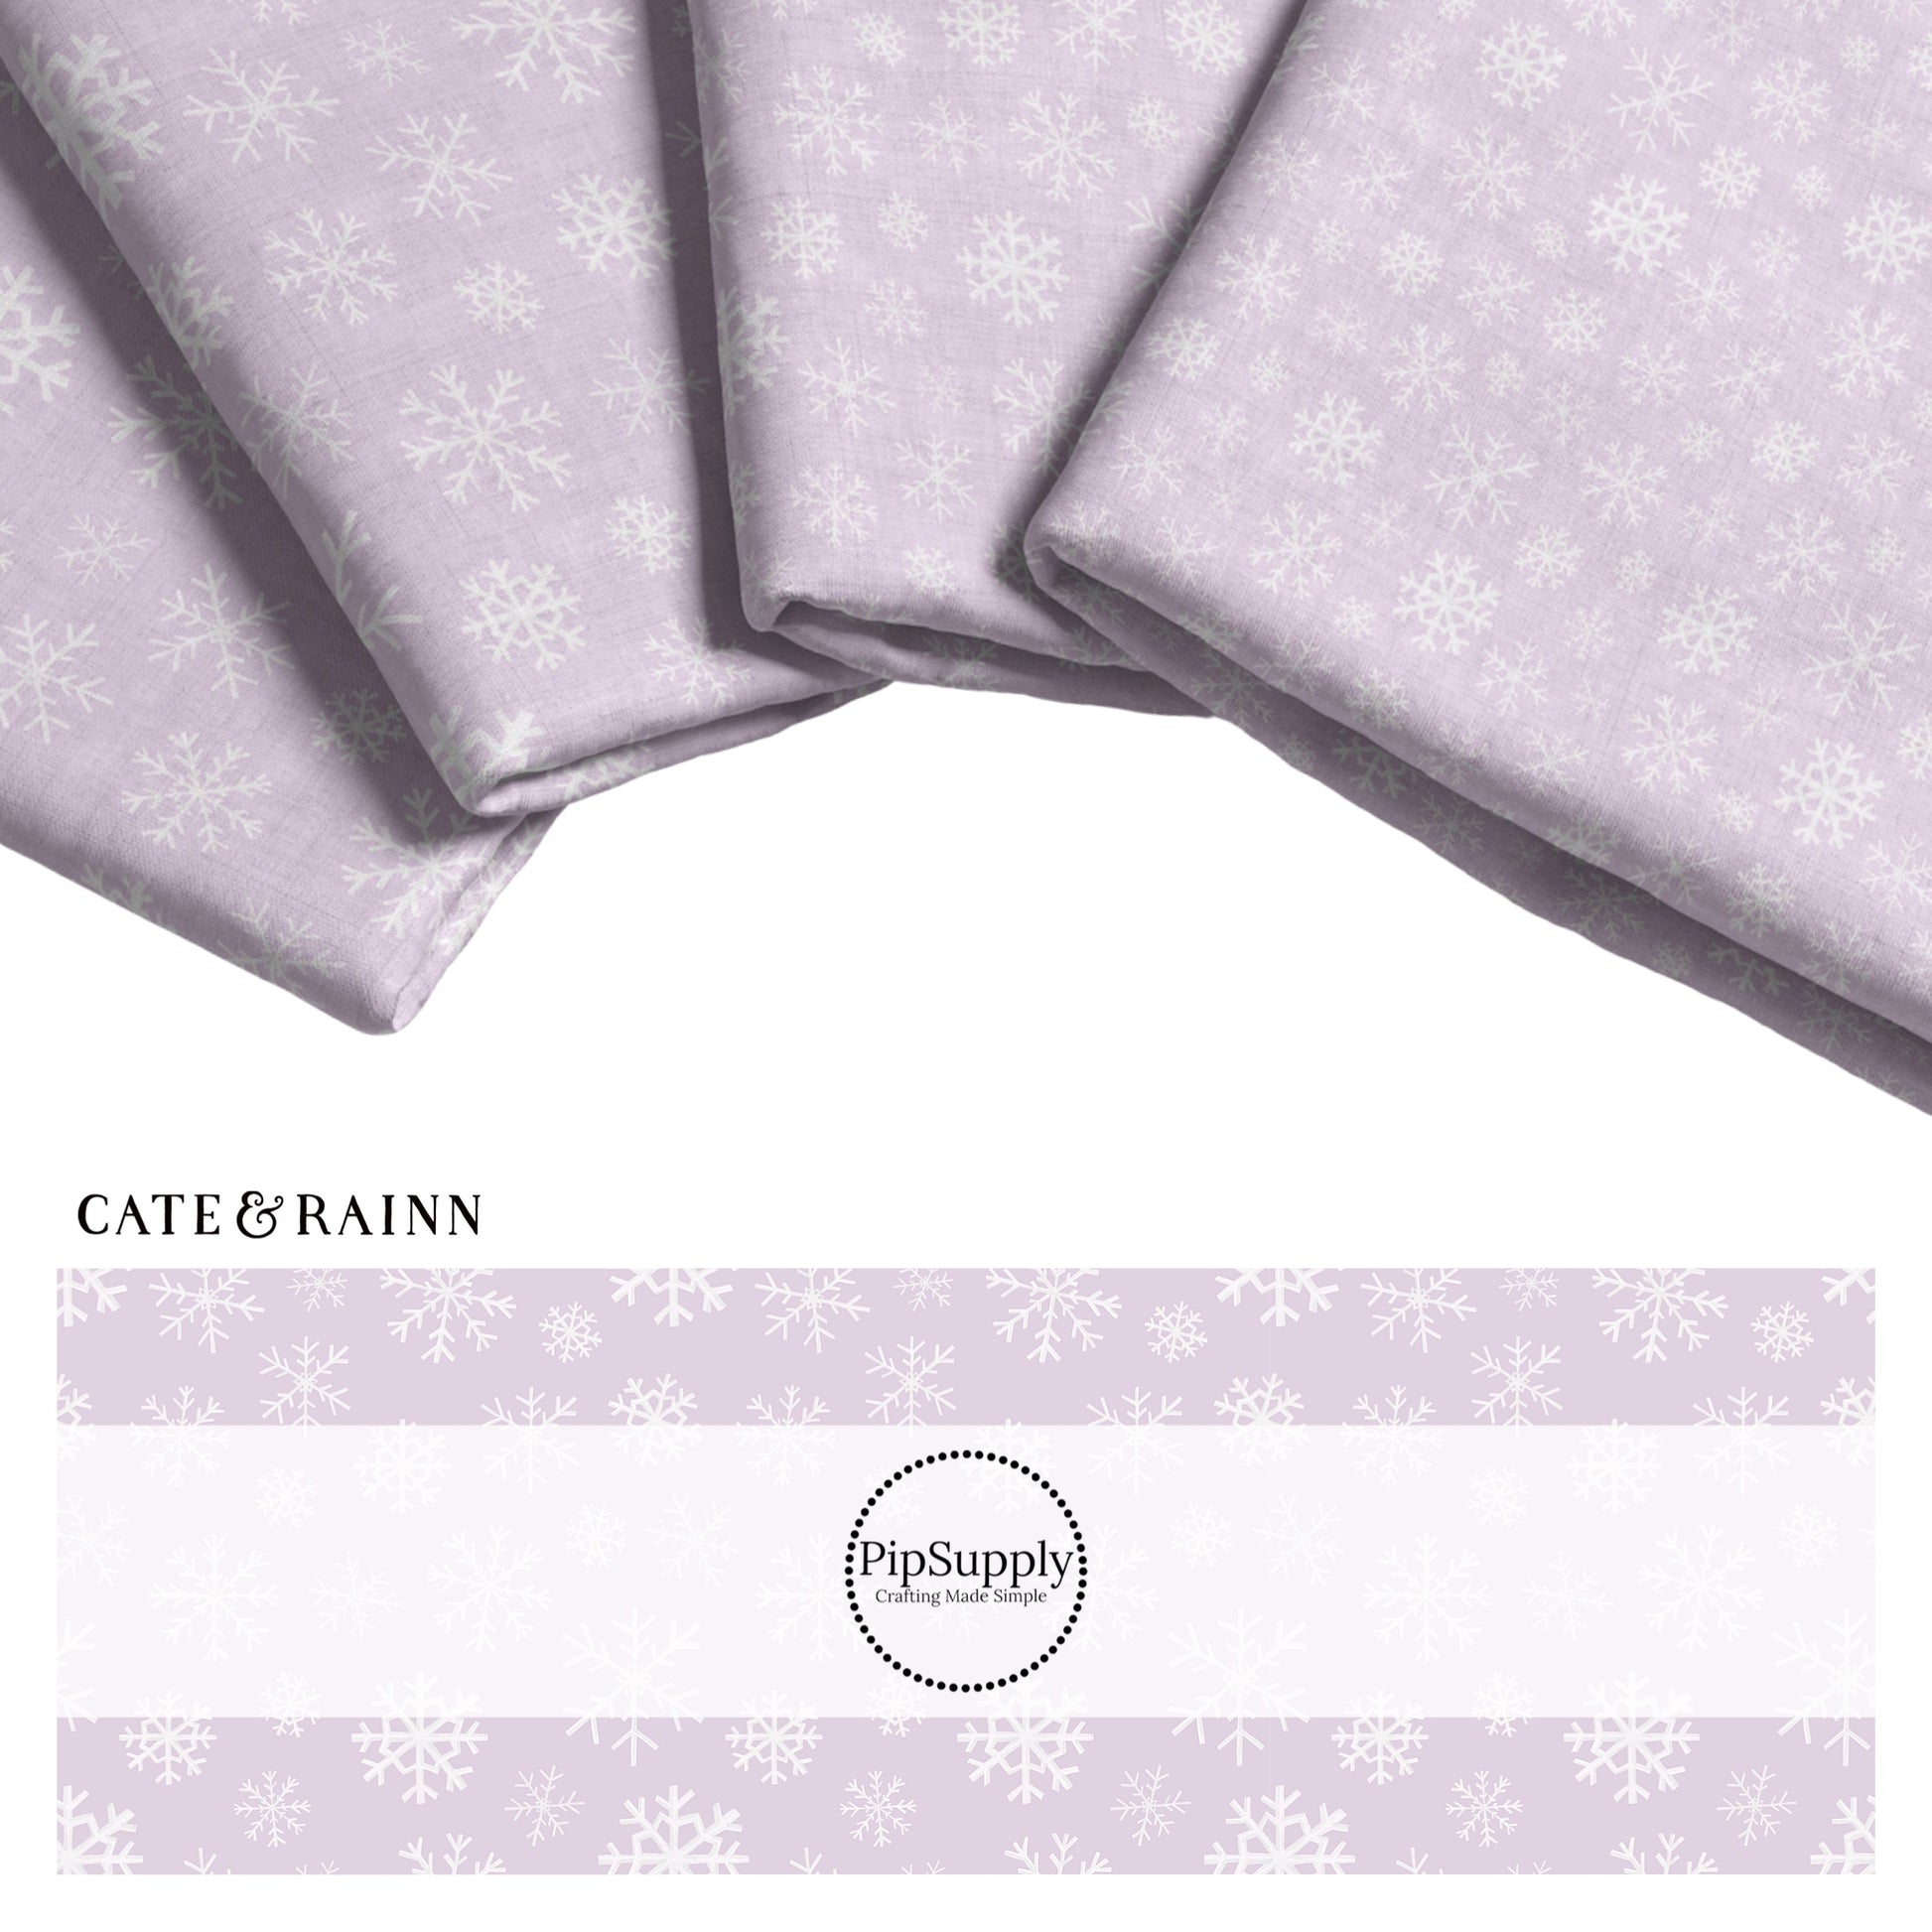 Purple Fabric Stack with white snowflake flurries